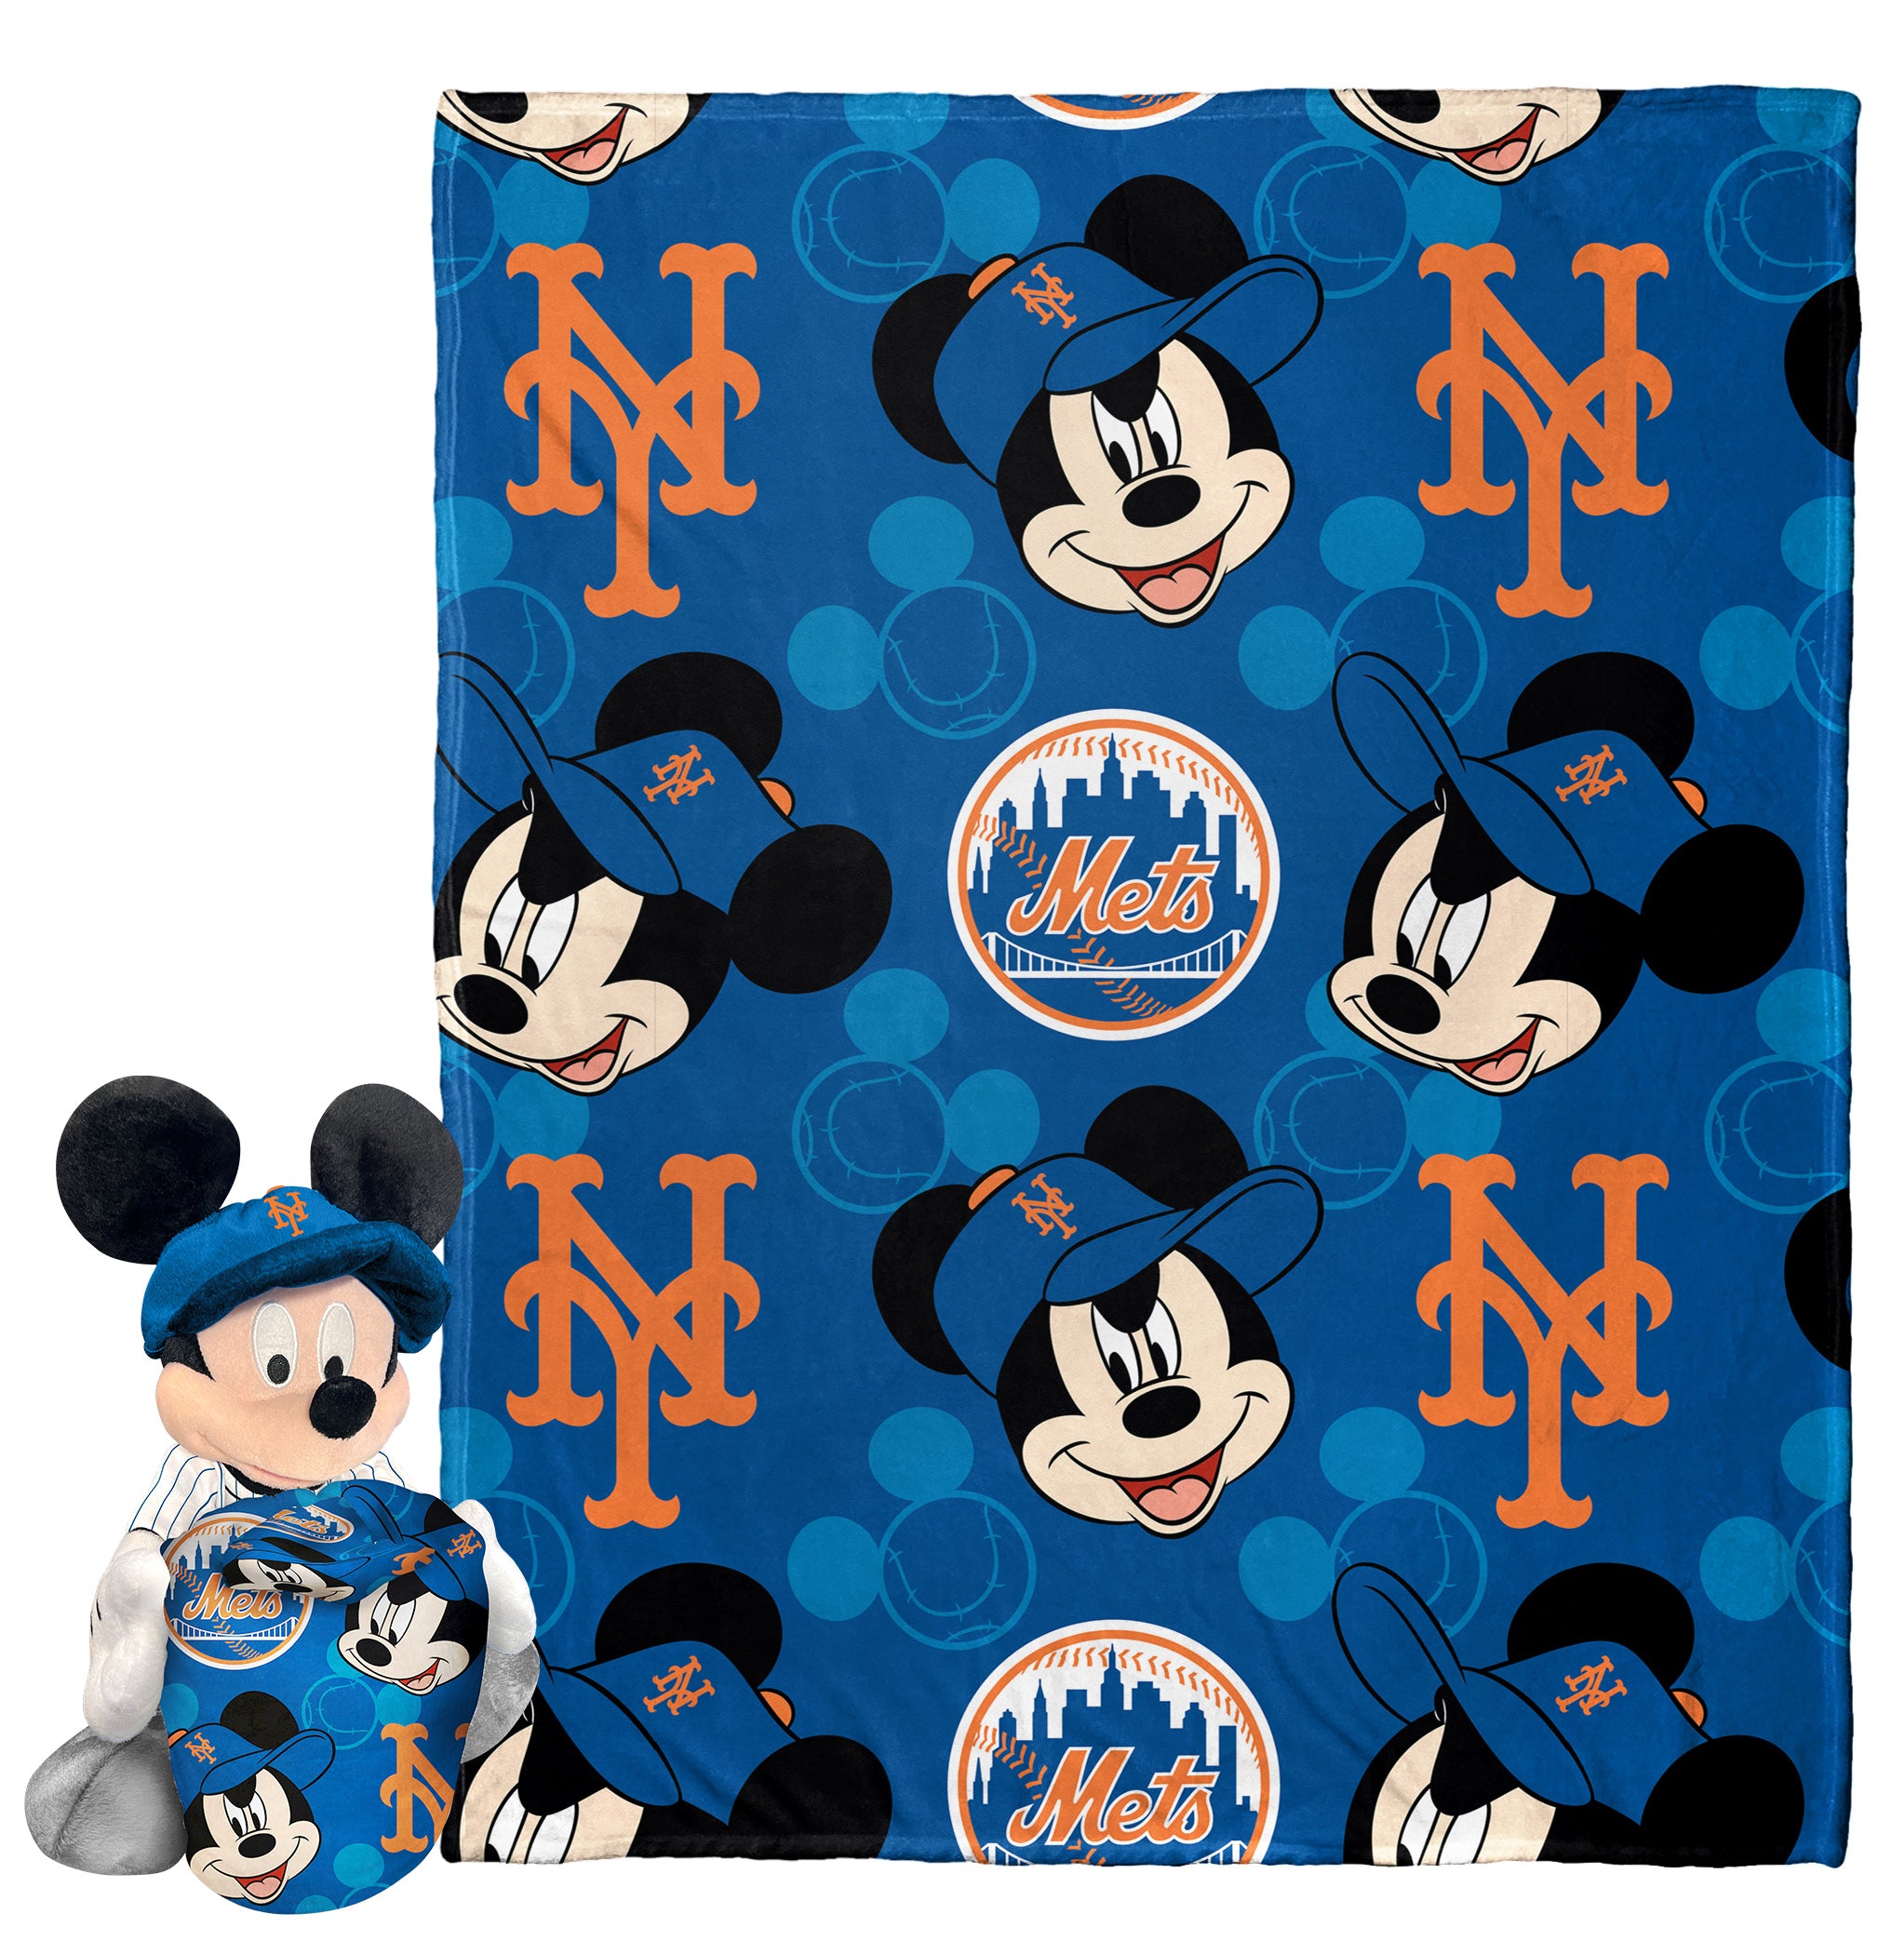 MLB New York Mets Pitch Crazy Mickey Hugger Pillow & Silk Touch Throw Blanket Set 40x50 Inches